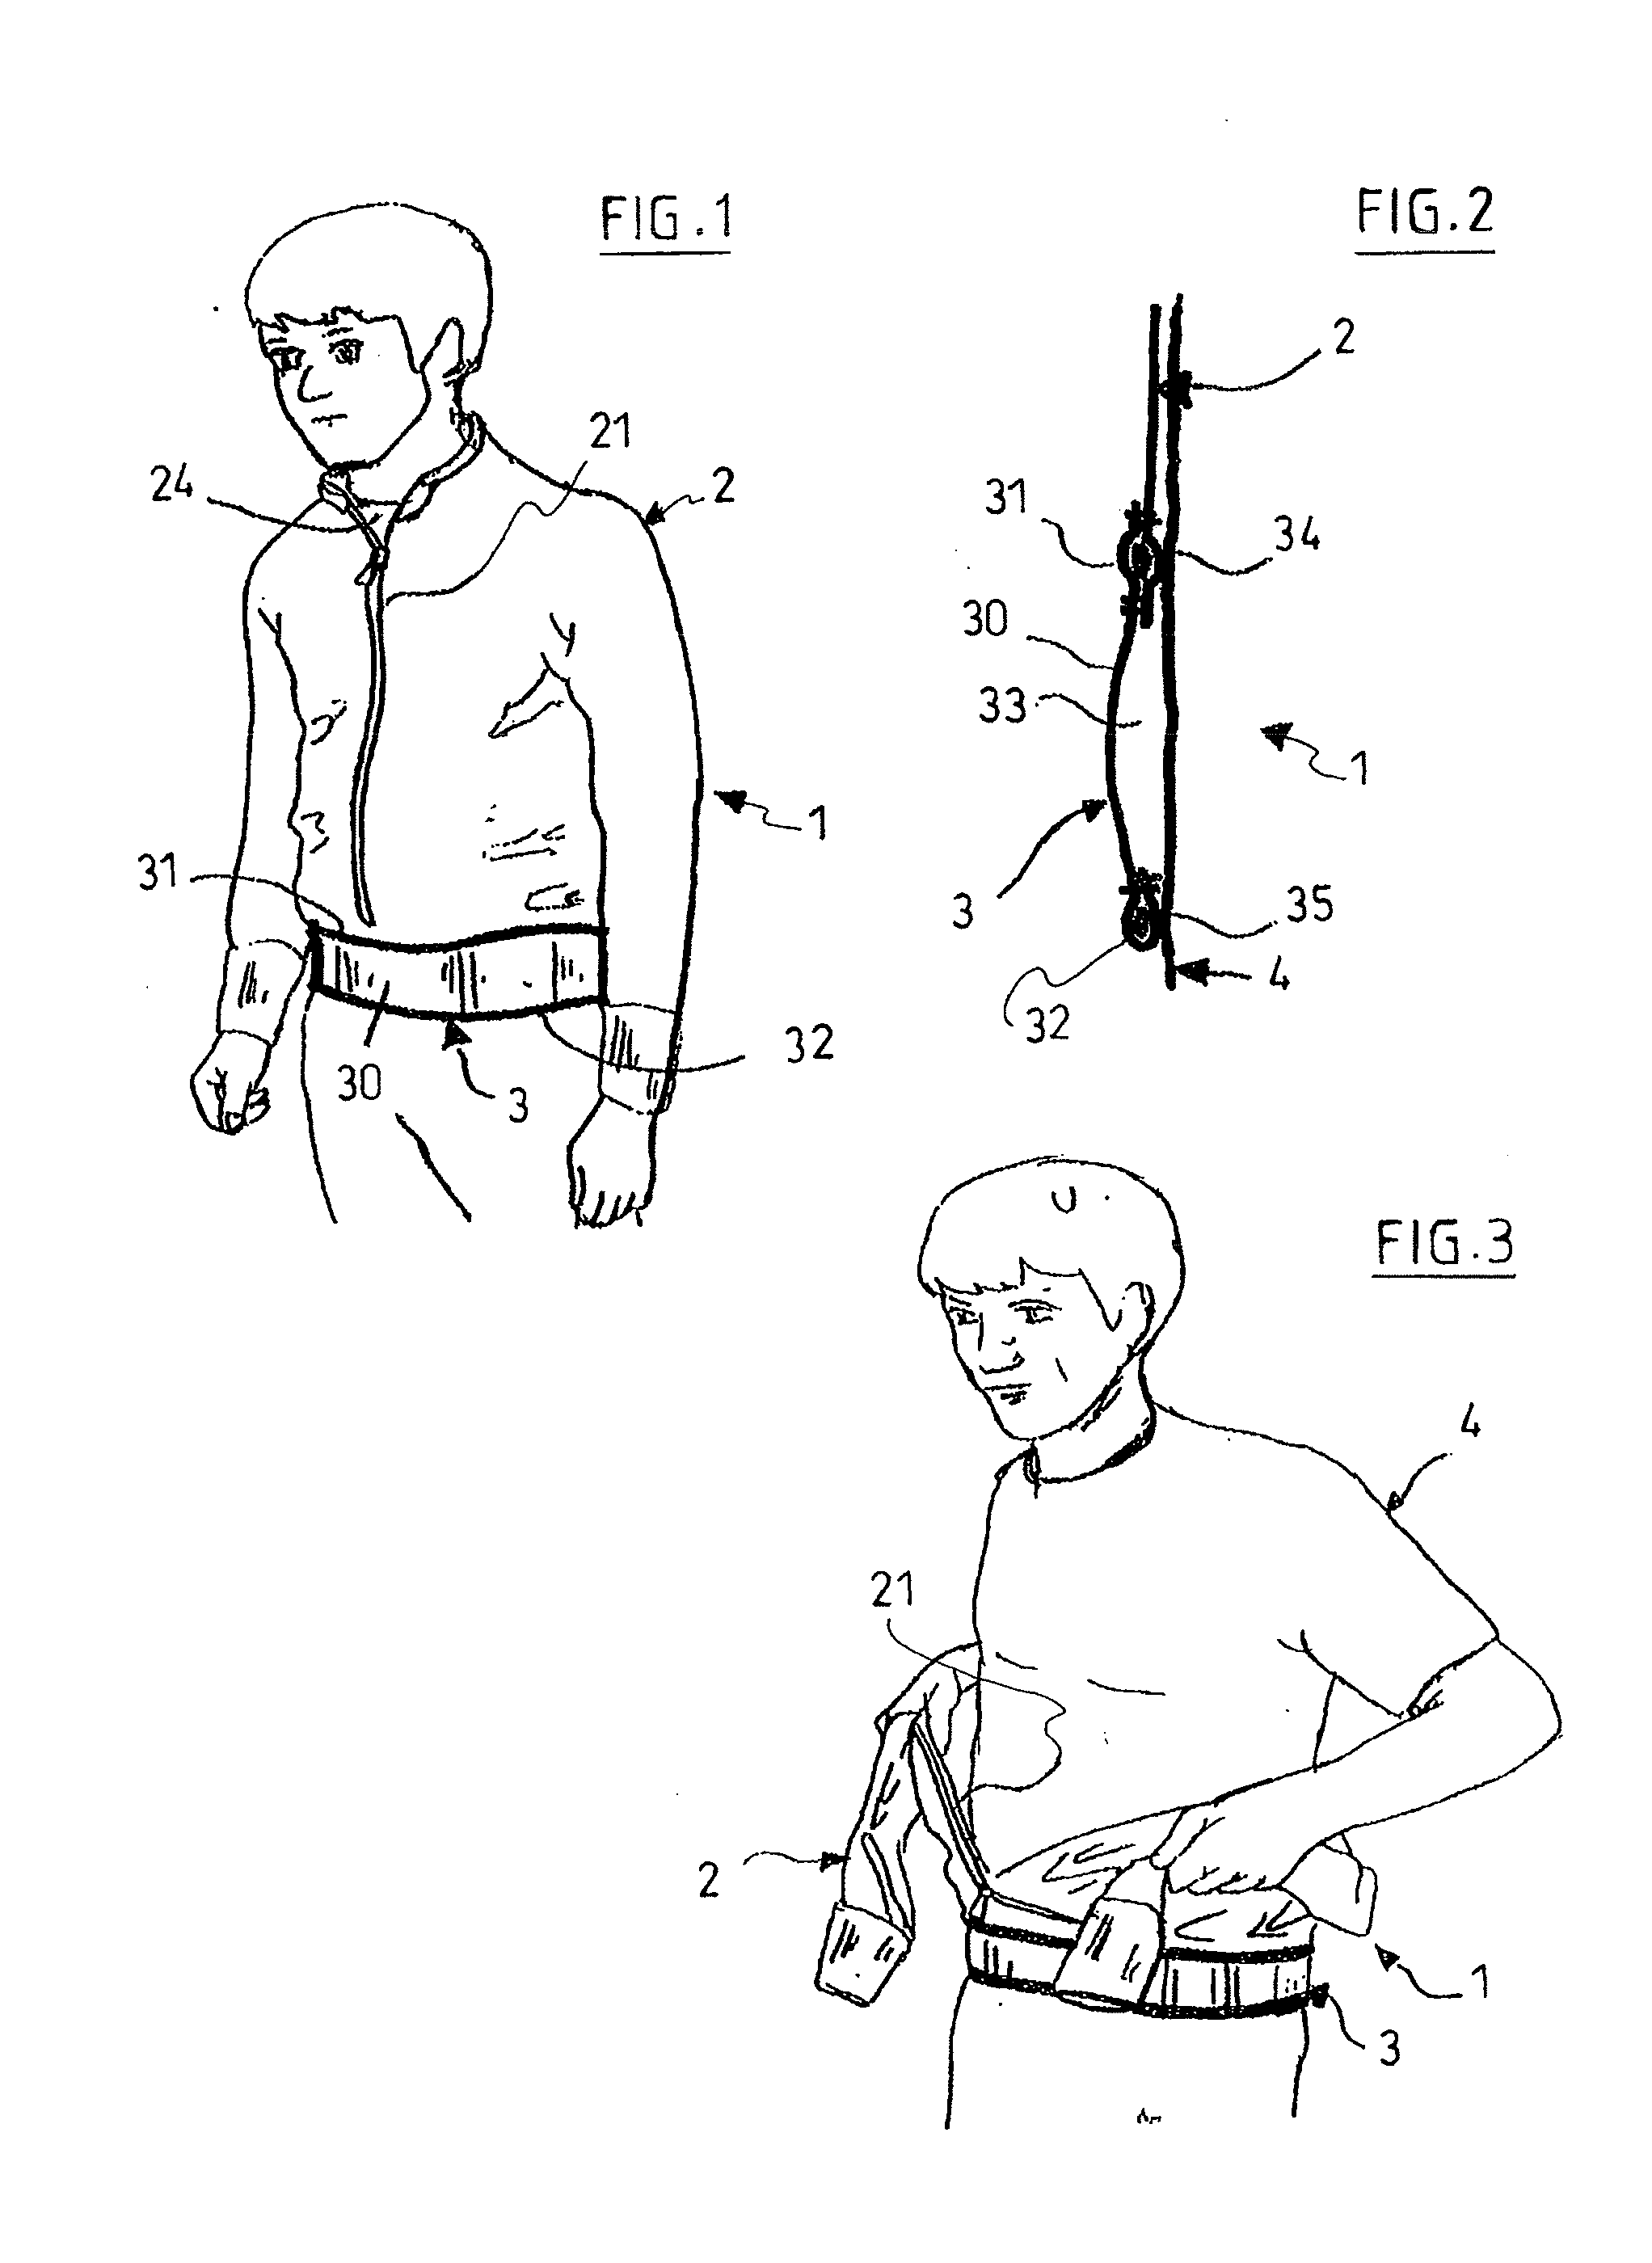 Article of clothing facilitating its own storage during use